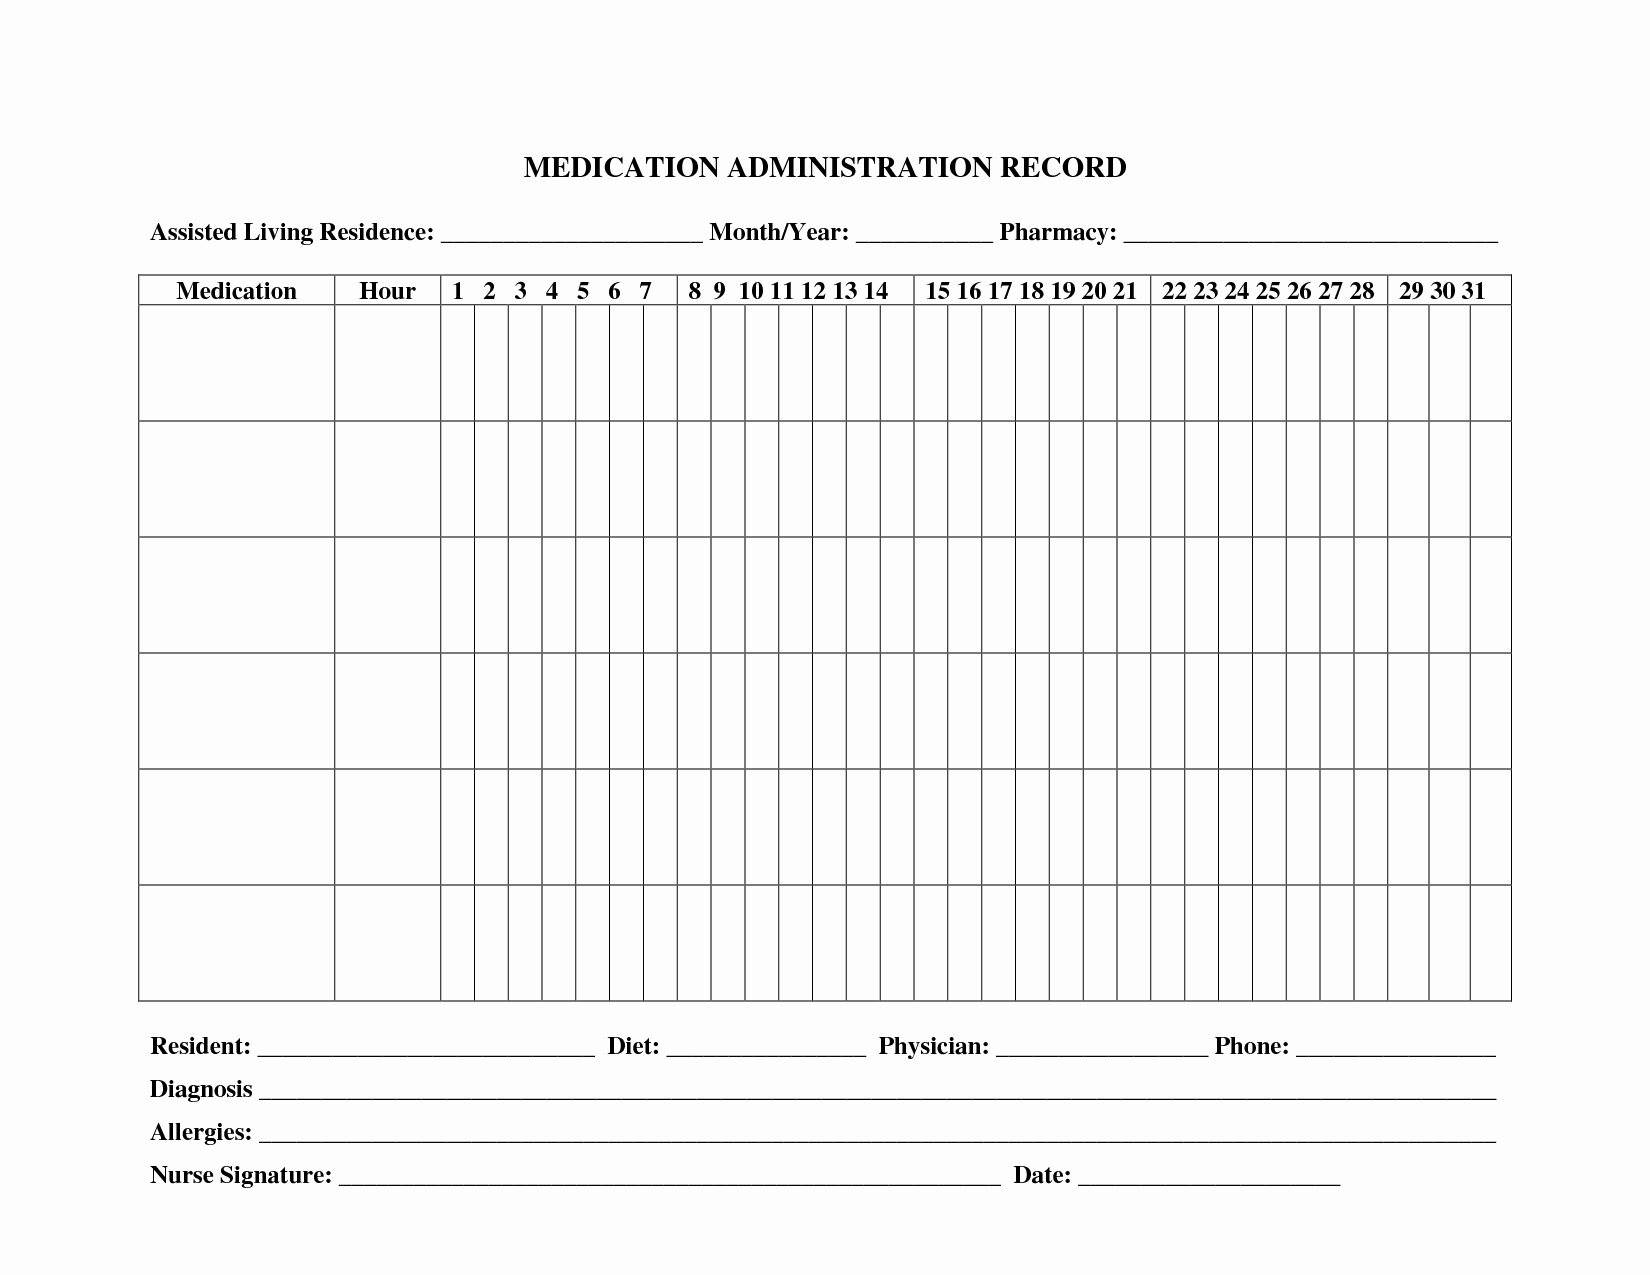 Medication Administration Record Template Awesome 10 Best Of Administration Record Template